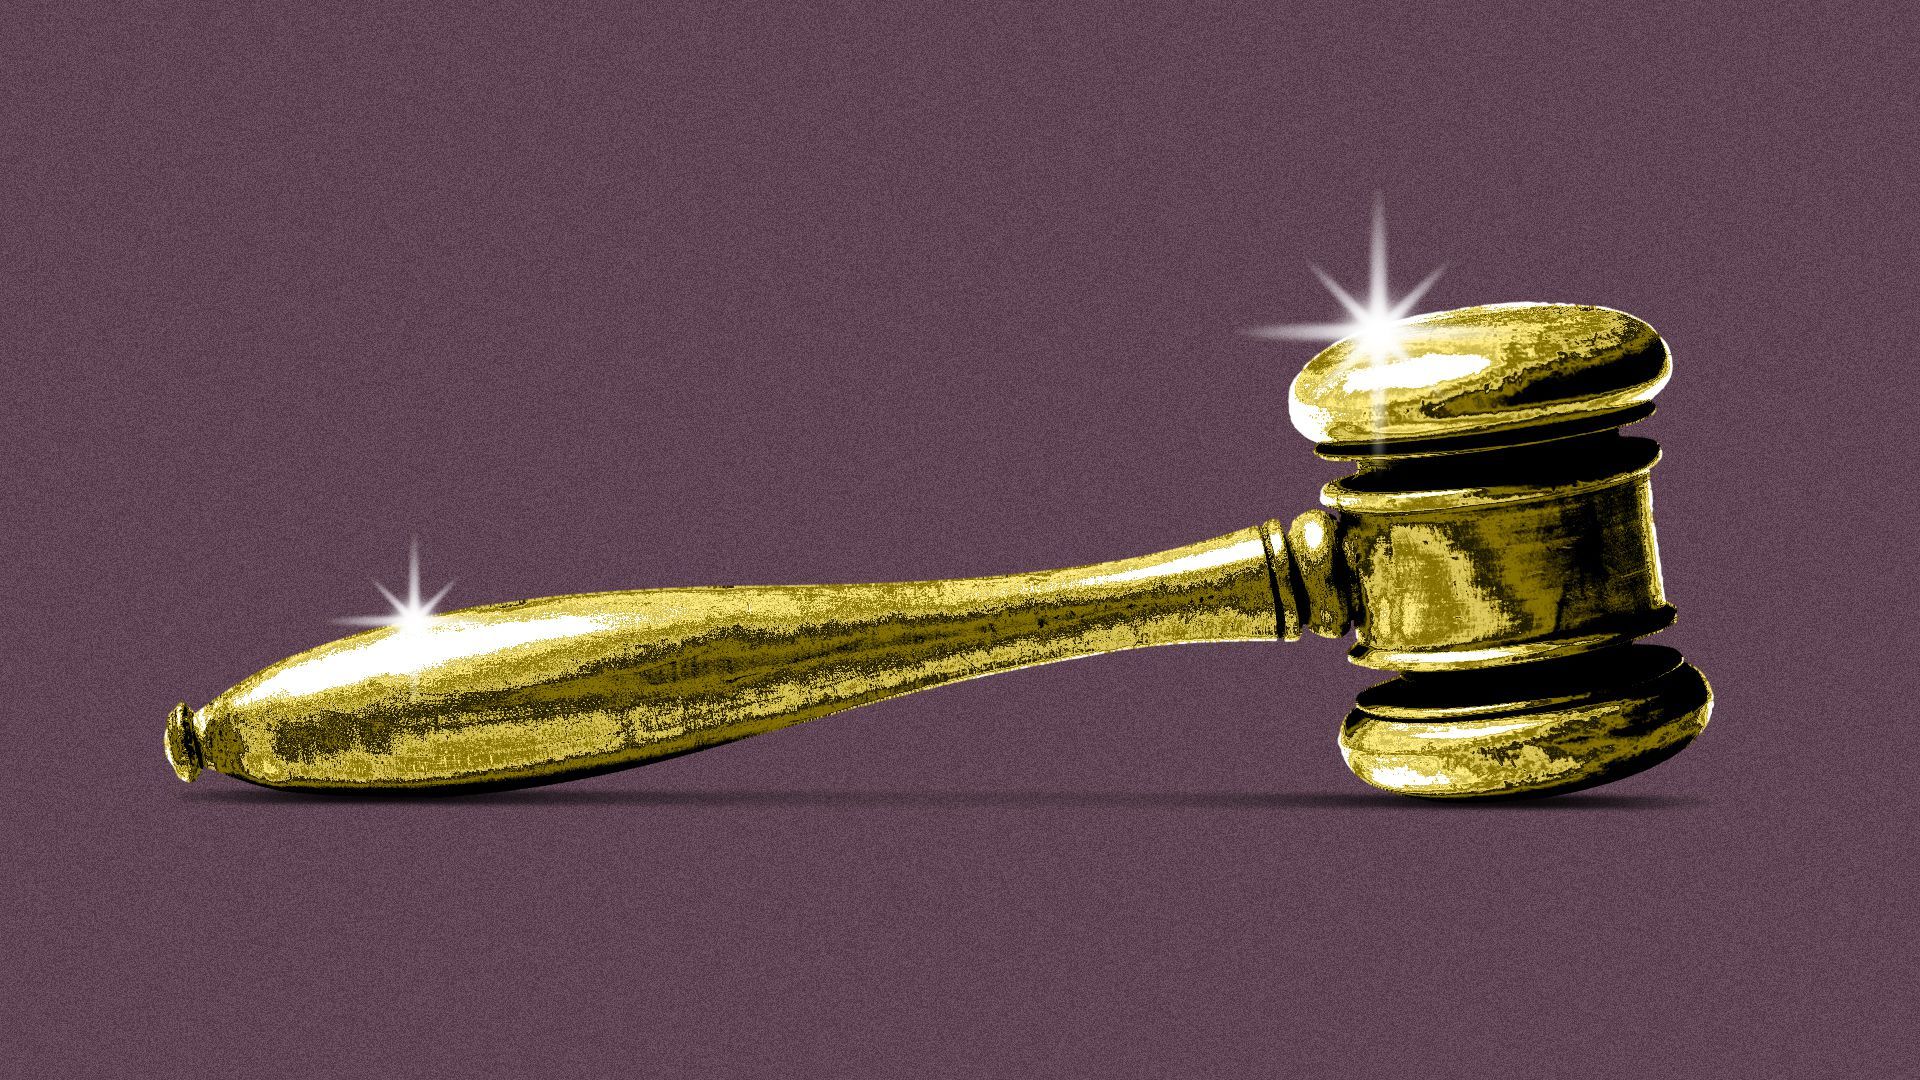 Illustration of a gavel made of gold.